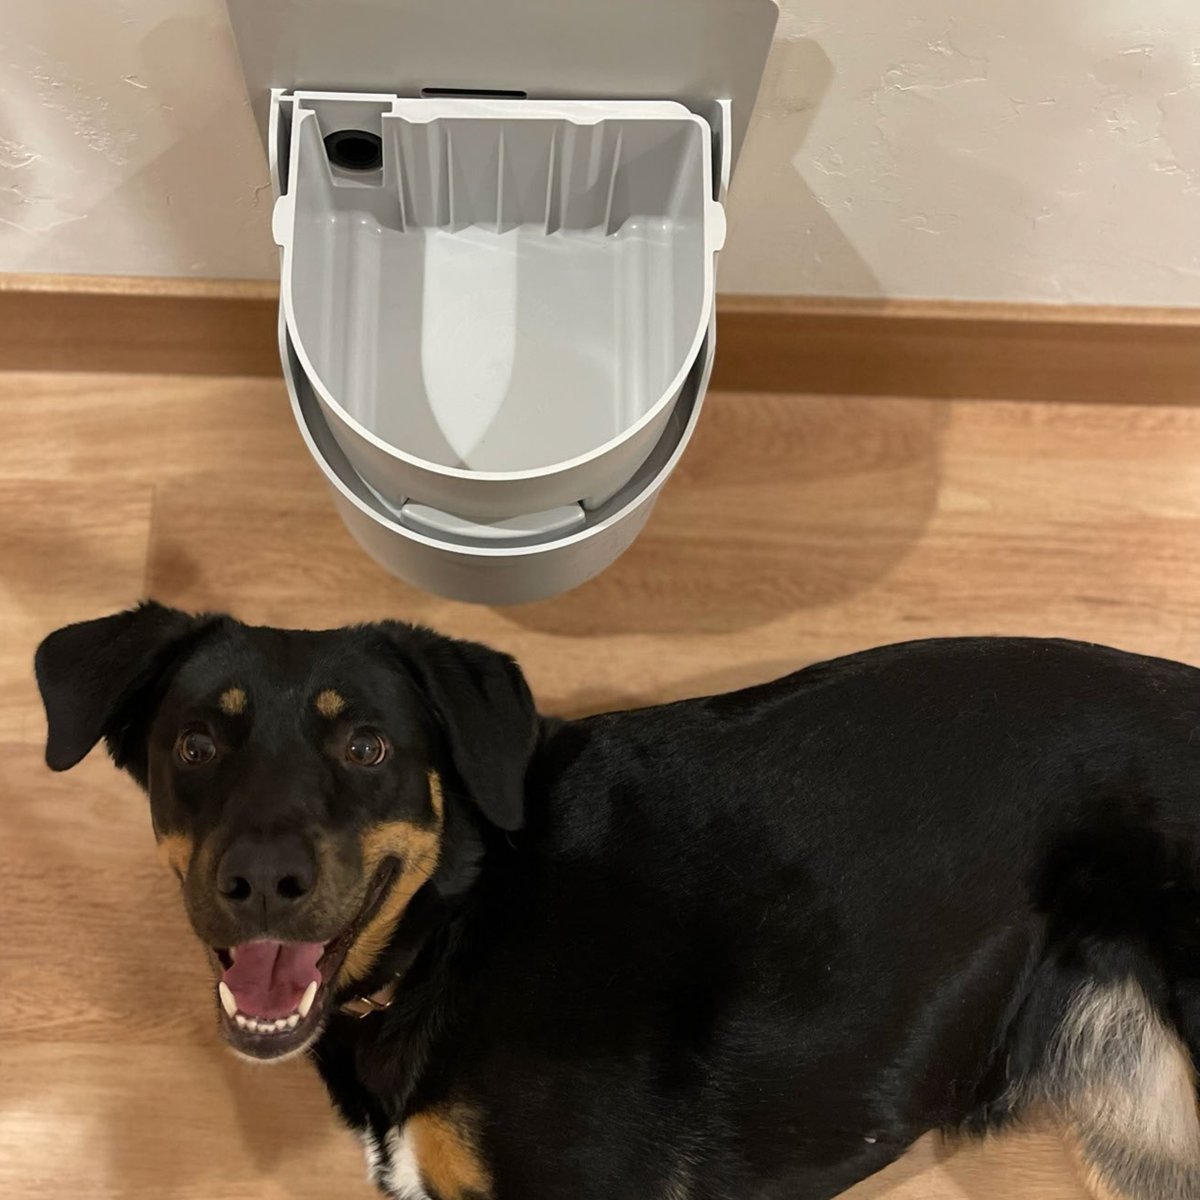 Everyone deserves fresh water, pets included.
#waterbowl #petcare #pethealth #petlovers #petsofinstagram #petfriendly #petlife #petaccessories #petfancy #petsupplies #petproducts #dog #dogs #doglover #doglife #doglove #dogmom #dogdad #dogtoy #doghealth #amazonfinds #inventions